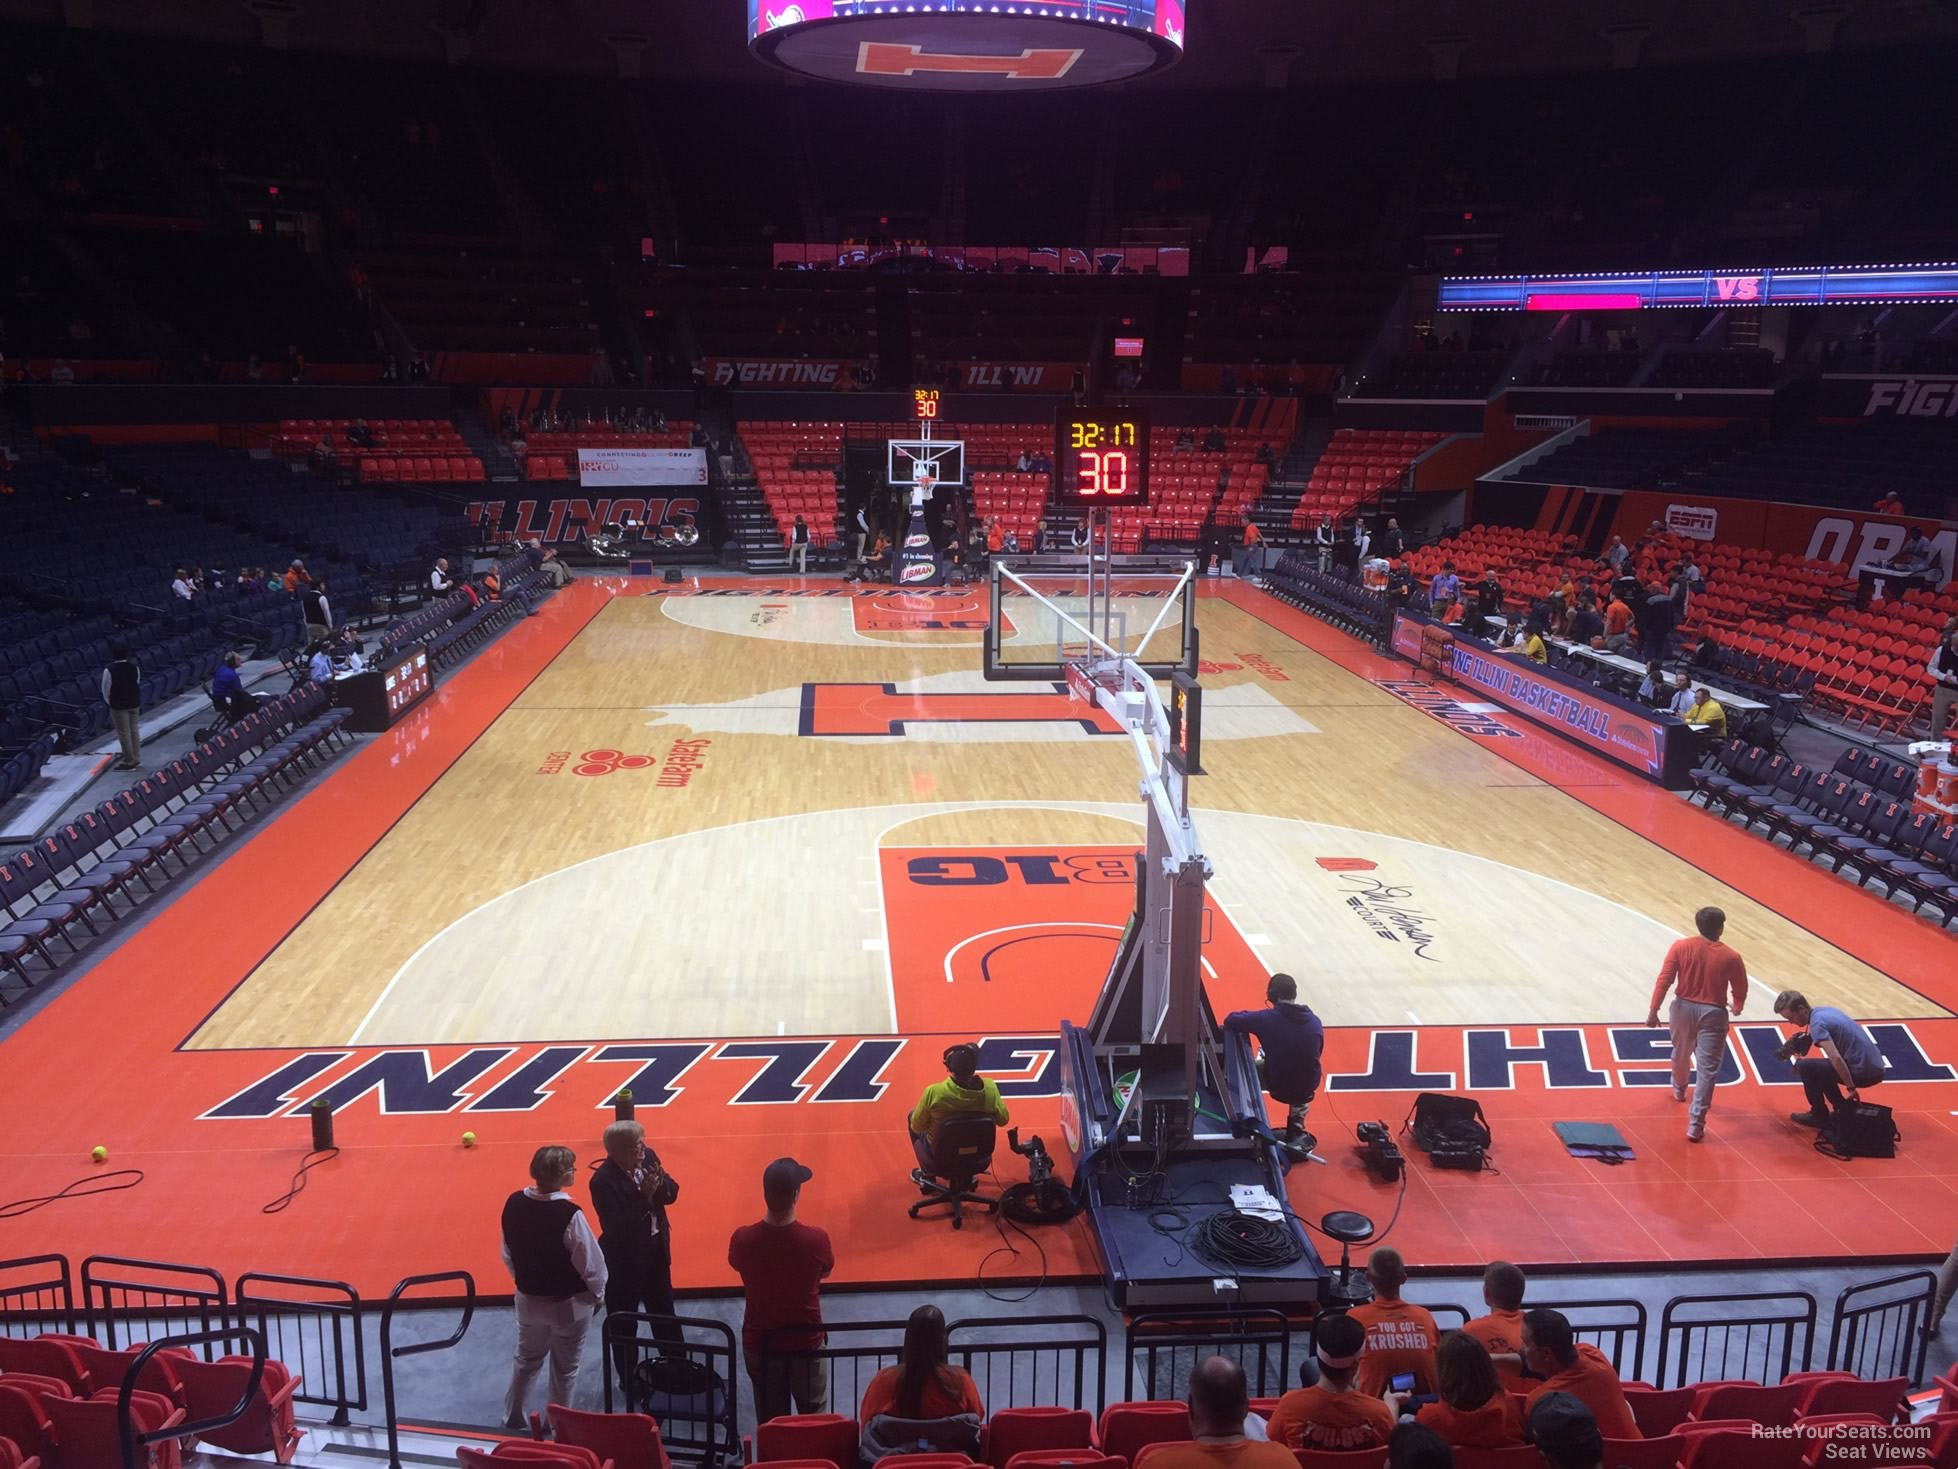 section 116, row 10 seat view  - state farm center